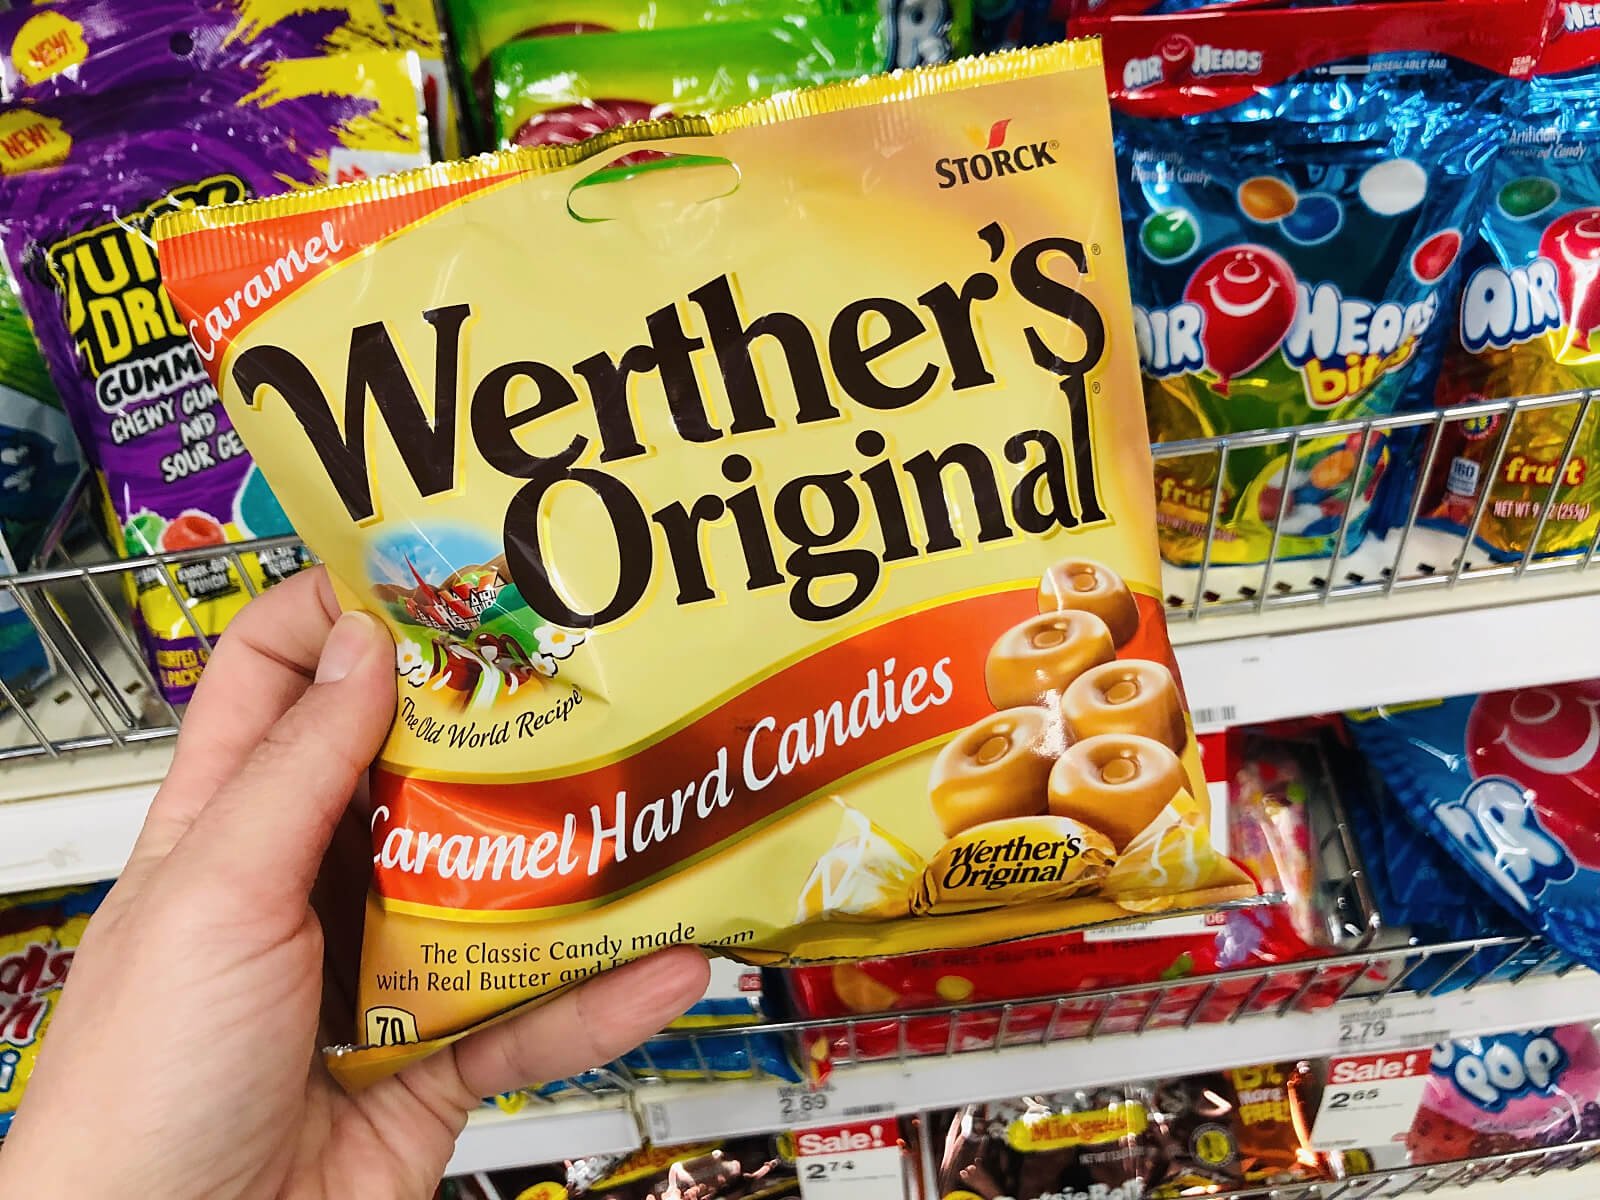 Close-up of a person's hand holding a bag of Werther's Original in a supermarket food aisle.